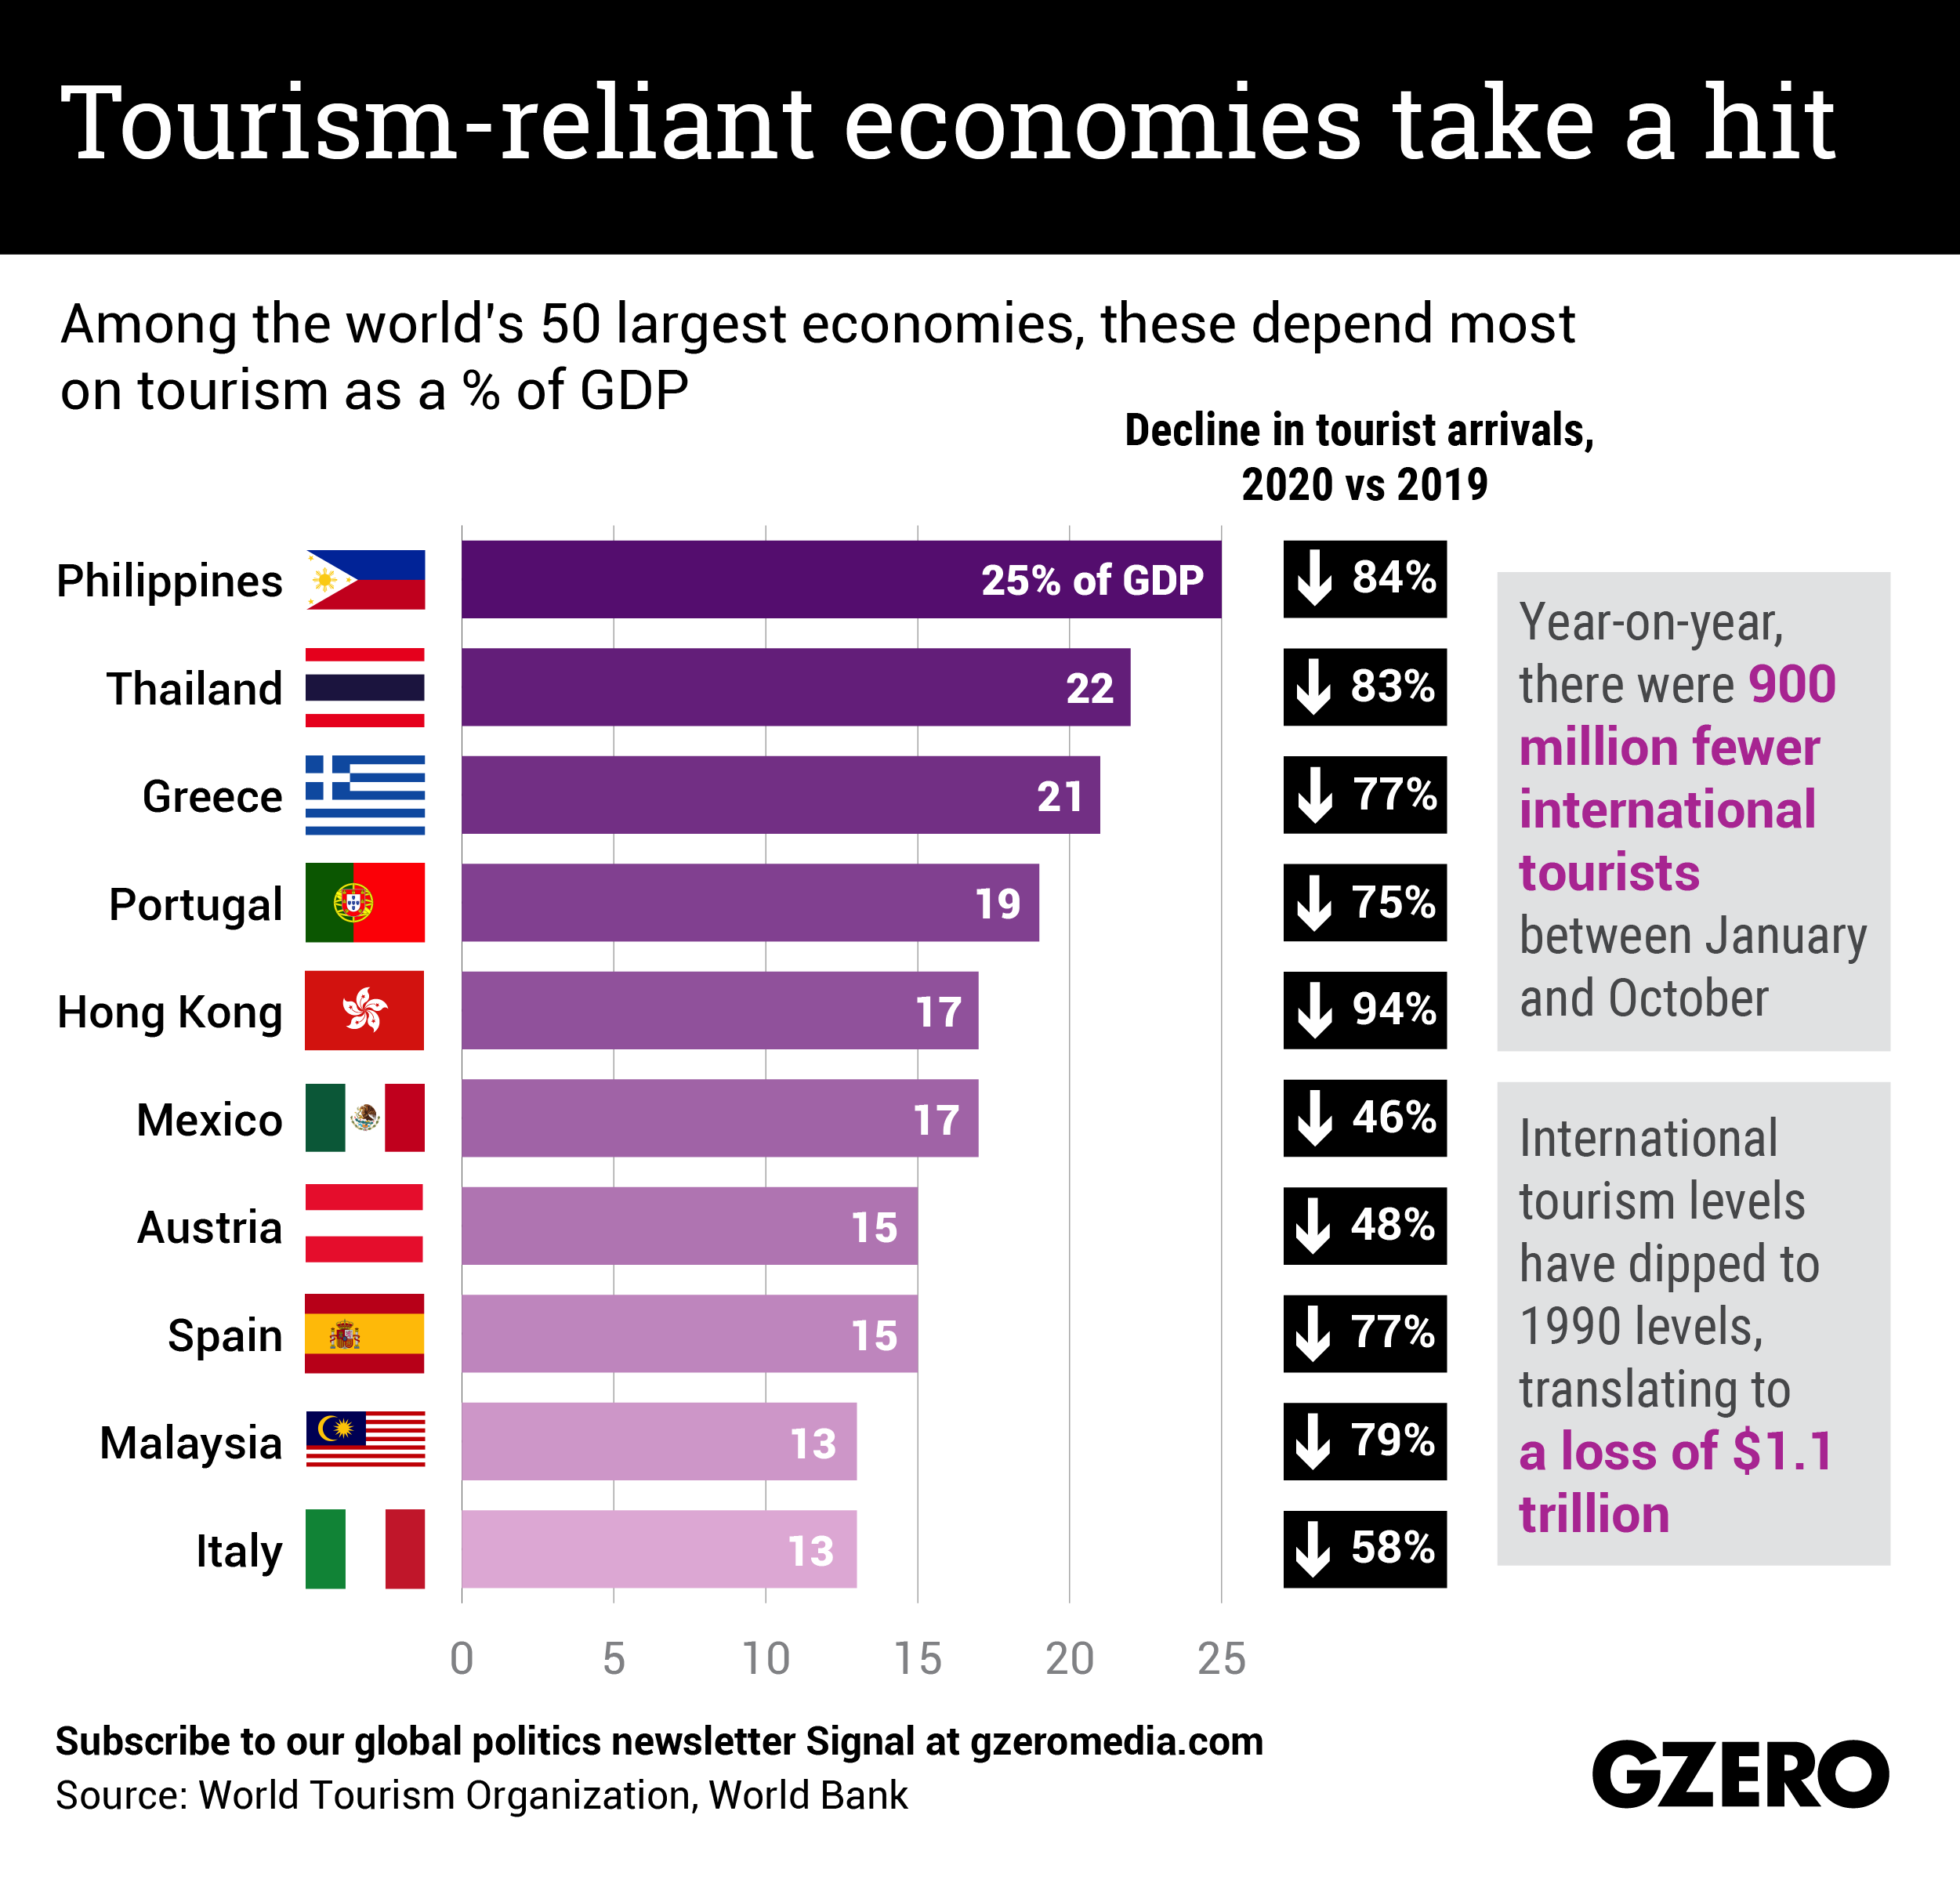 The Graphic Truth: Tourism-reliant economies take a hit